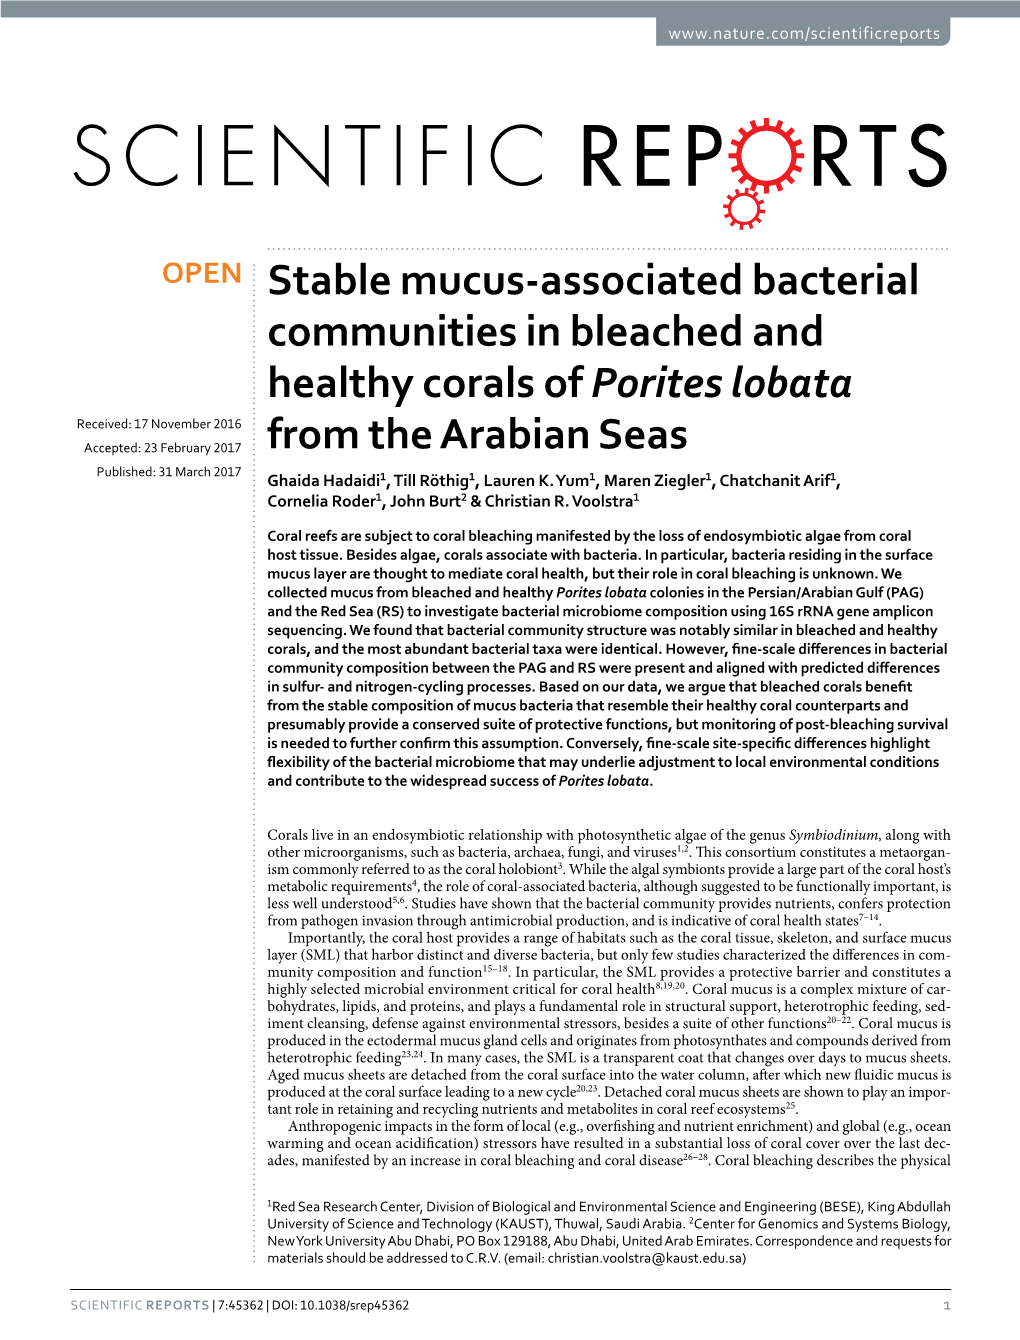 Stable Mucus-Associated Bacterial Communities in Bleached And